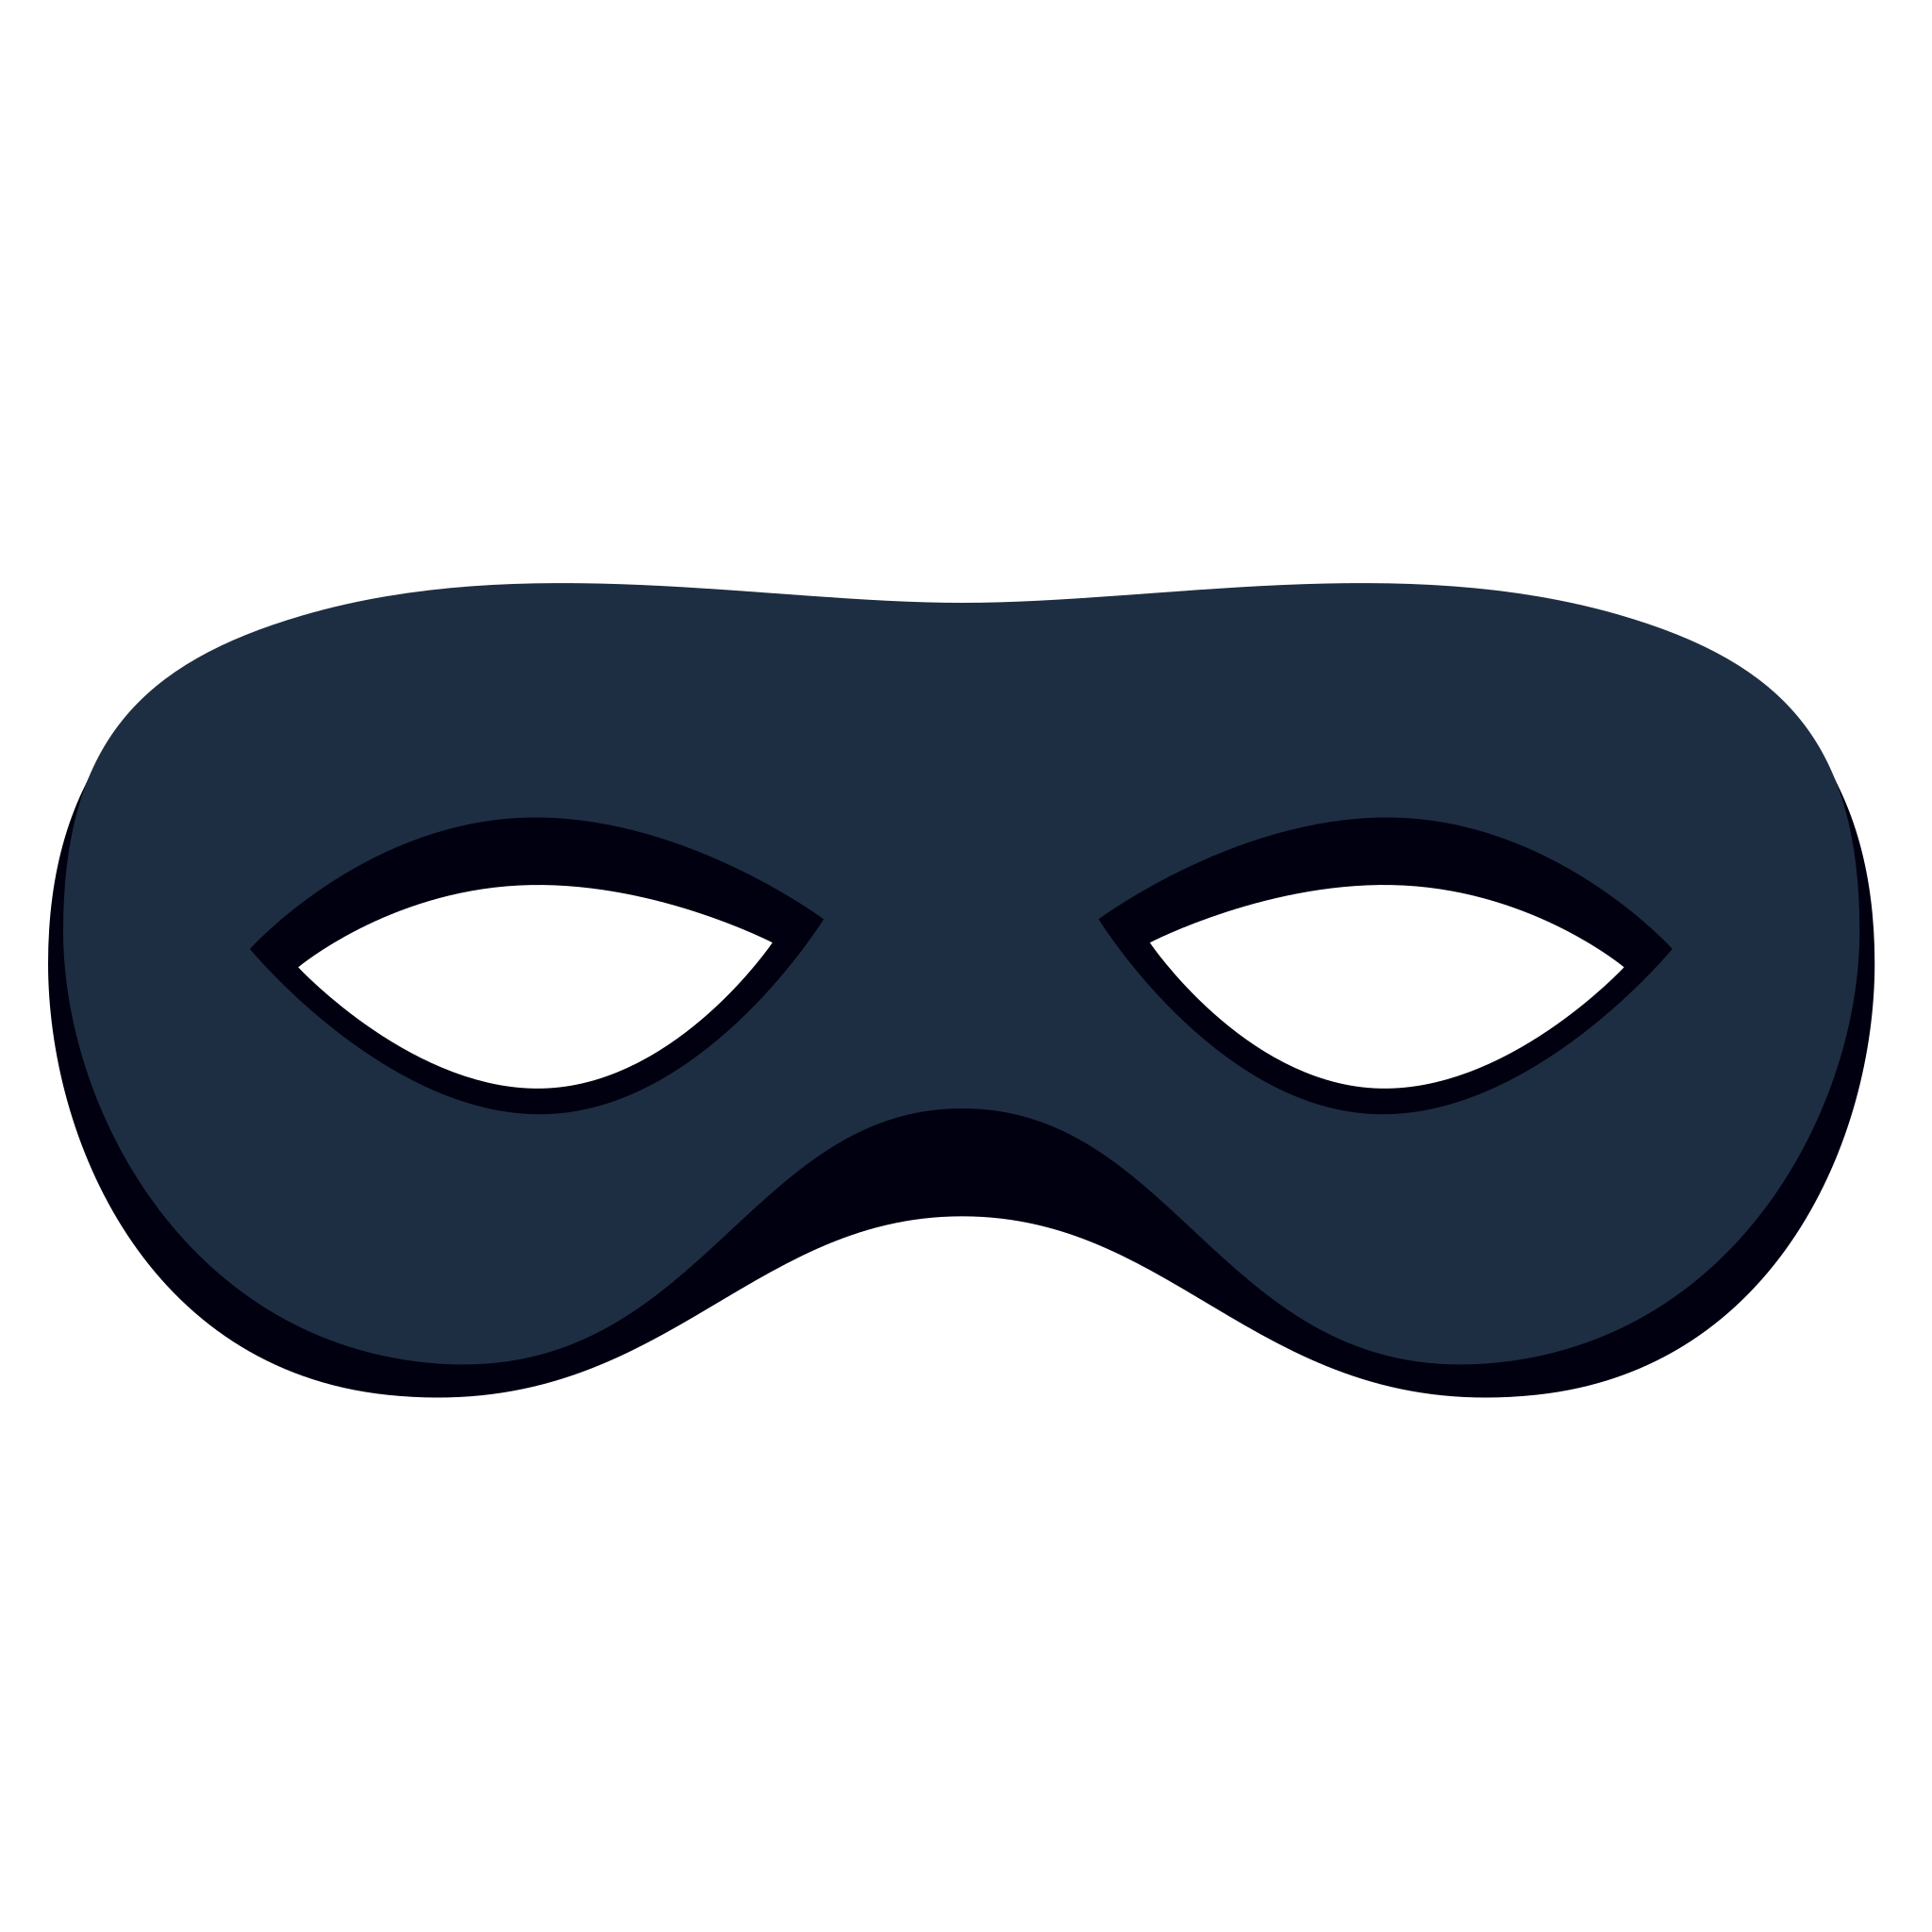 Robber mask clipart.